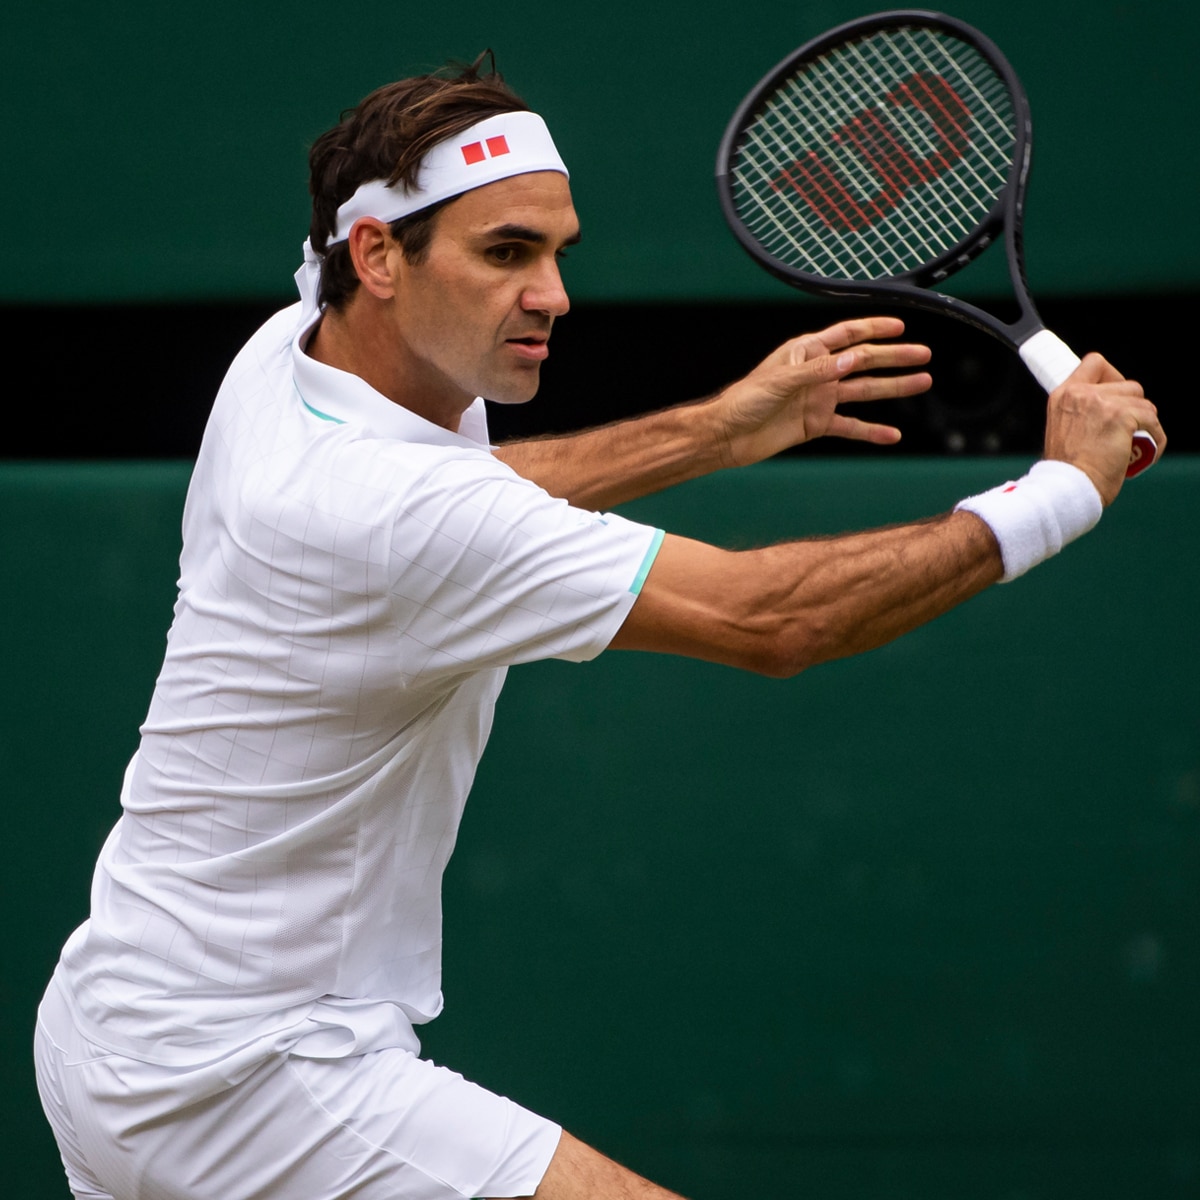 Why Tennis Champion Roger Federer Is Withdrawing From the Olympics